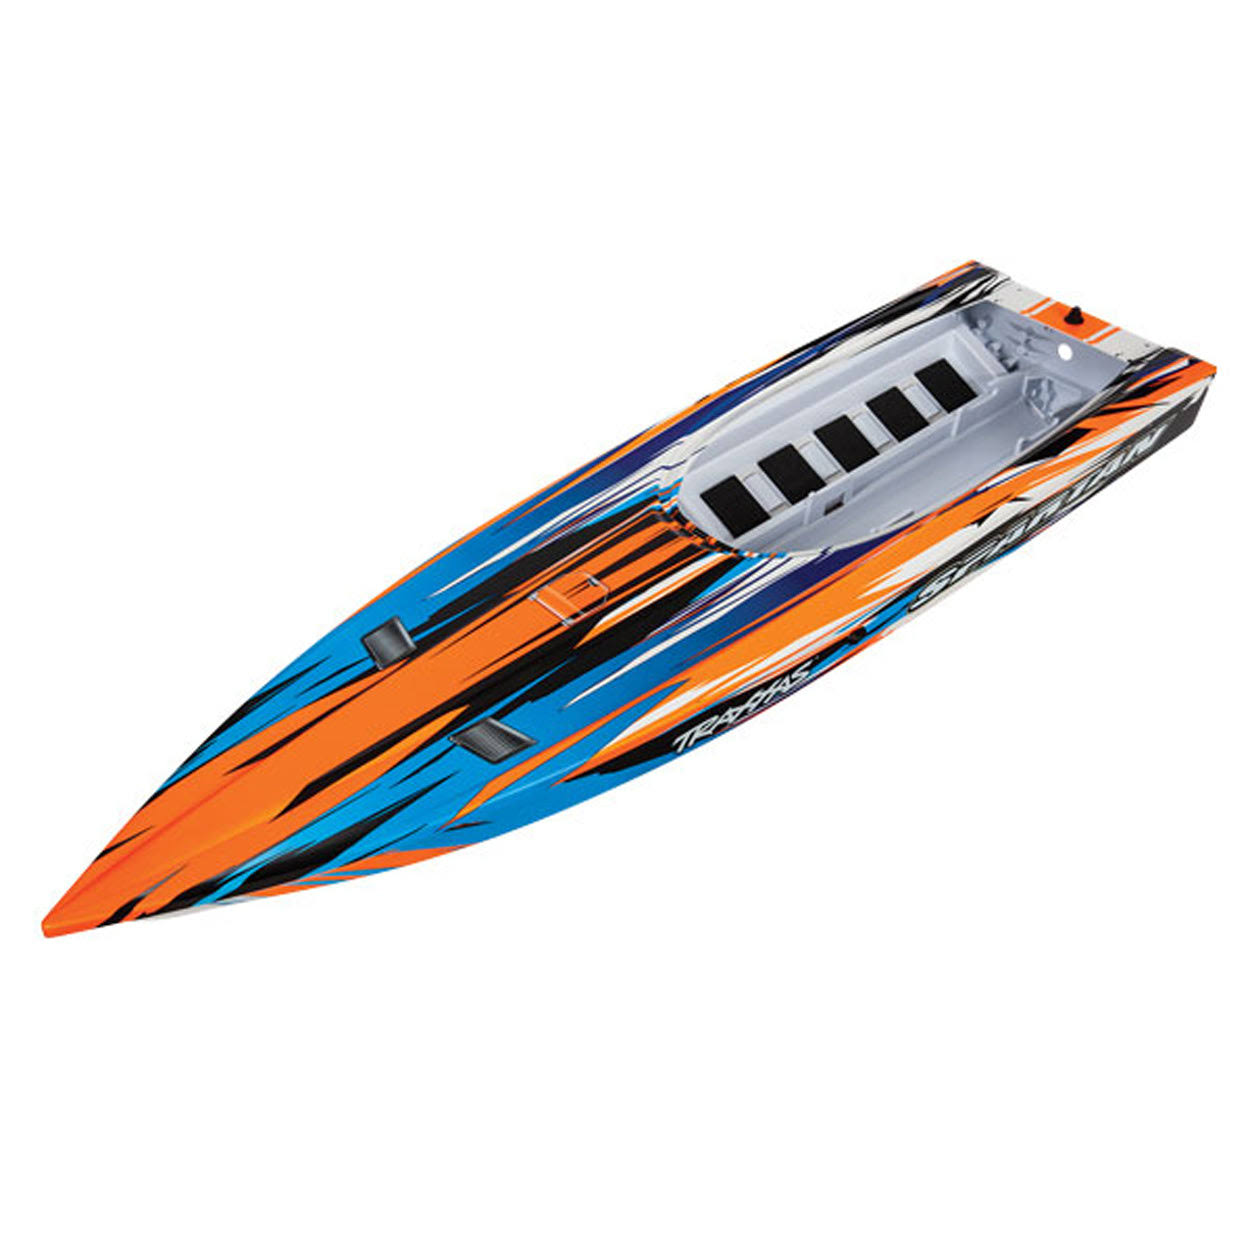 TRA5735 Traxxas Hull, Spartan, orange graphics (fully assembled)